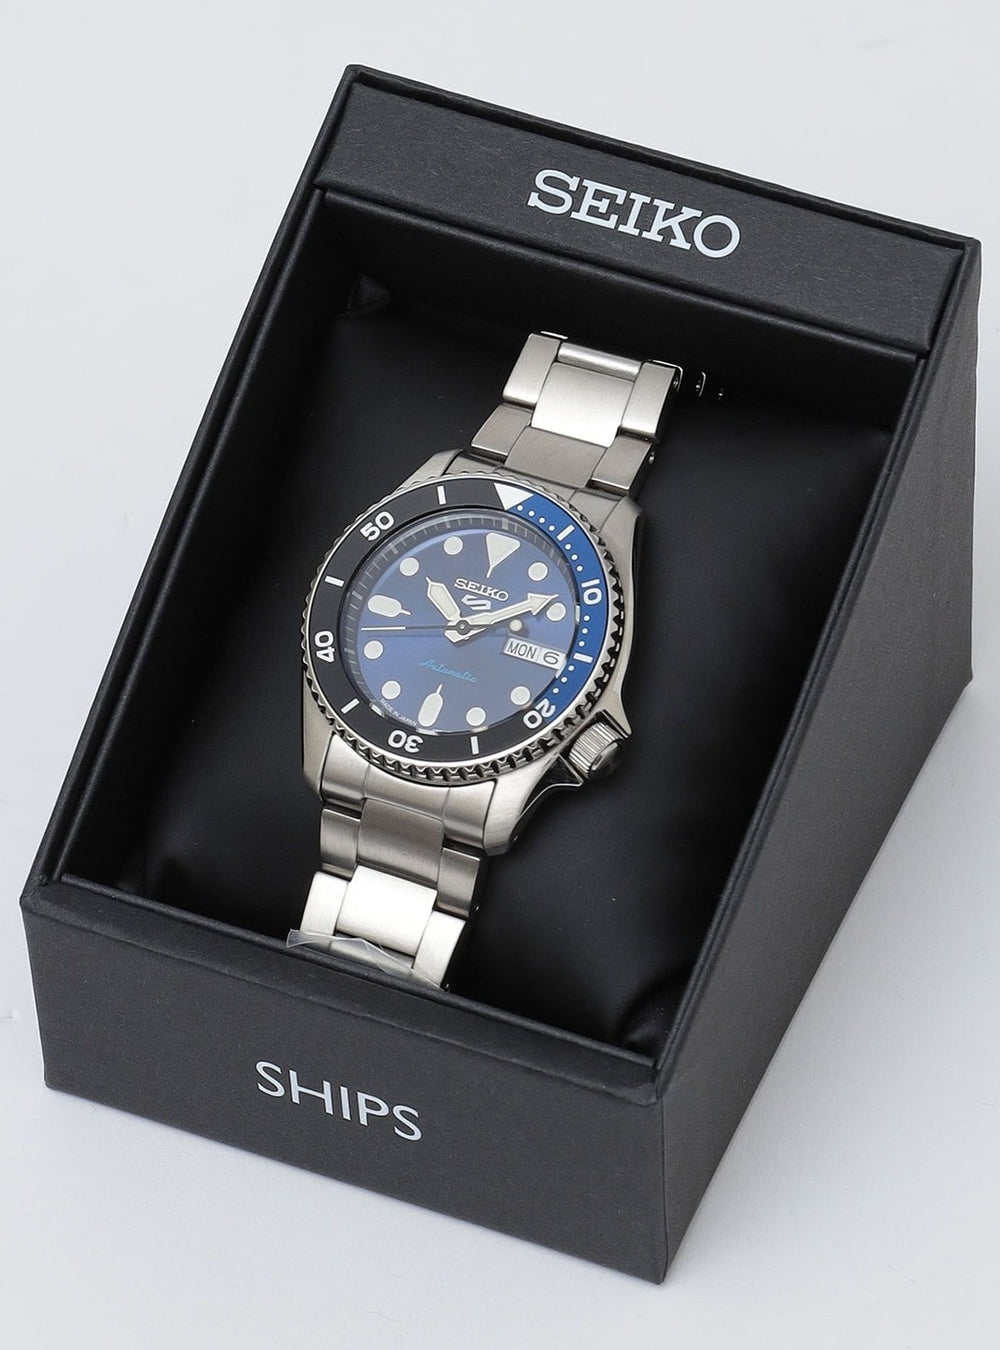 SEIKO 5 SPORTS x SHIPS WATCH SBSA247 MADE IN JAPAN LIMITED EDITION